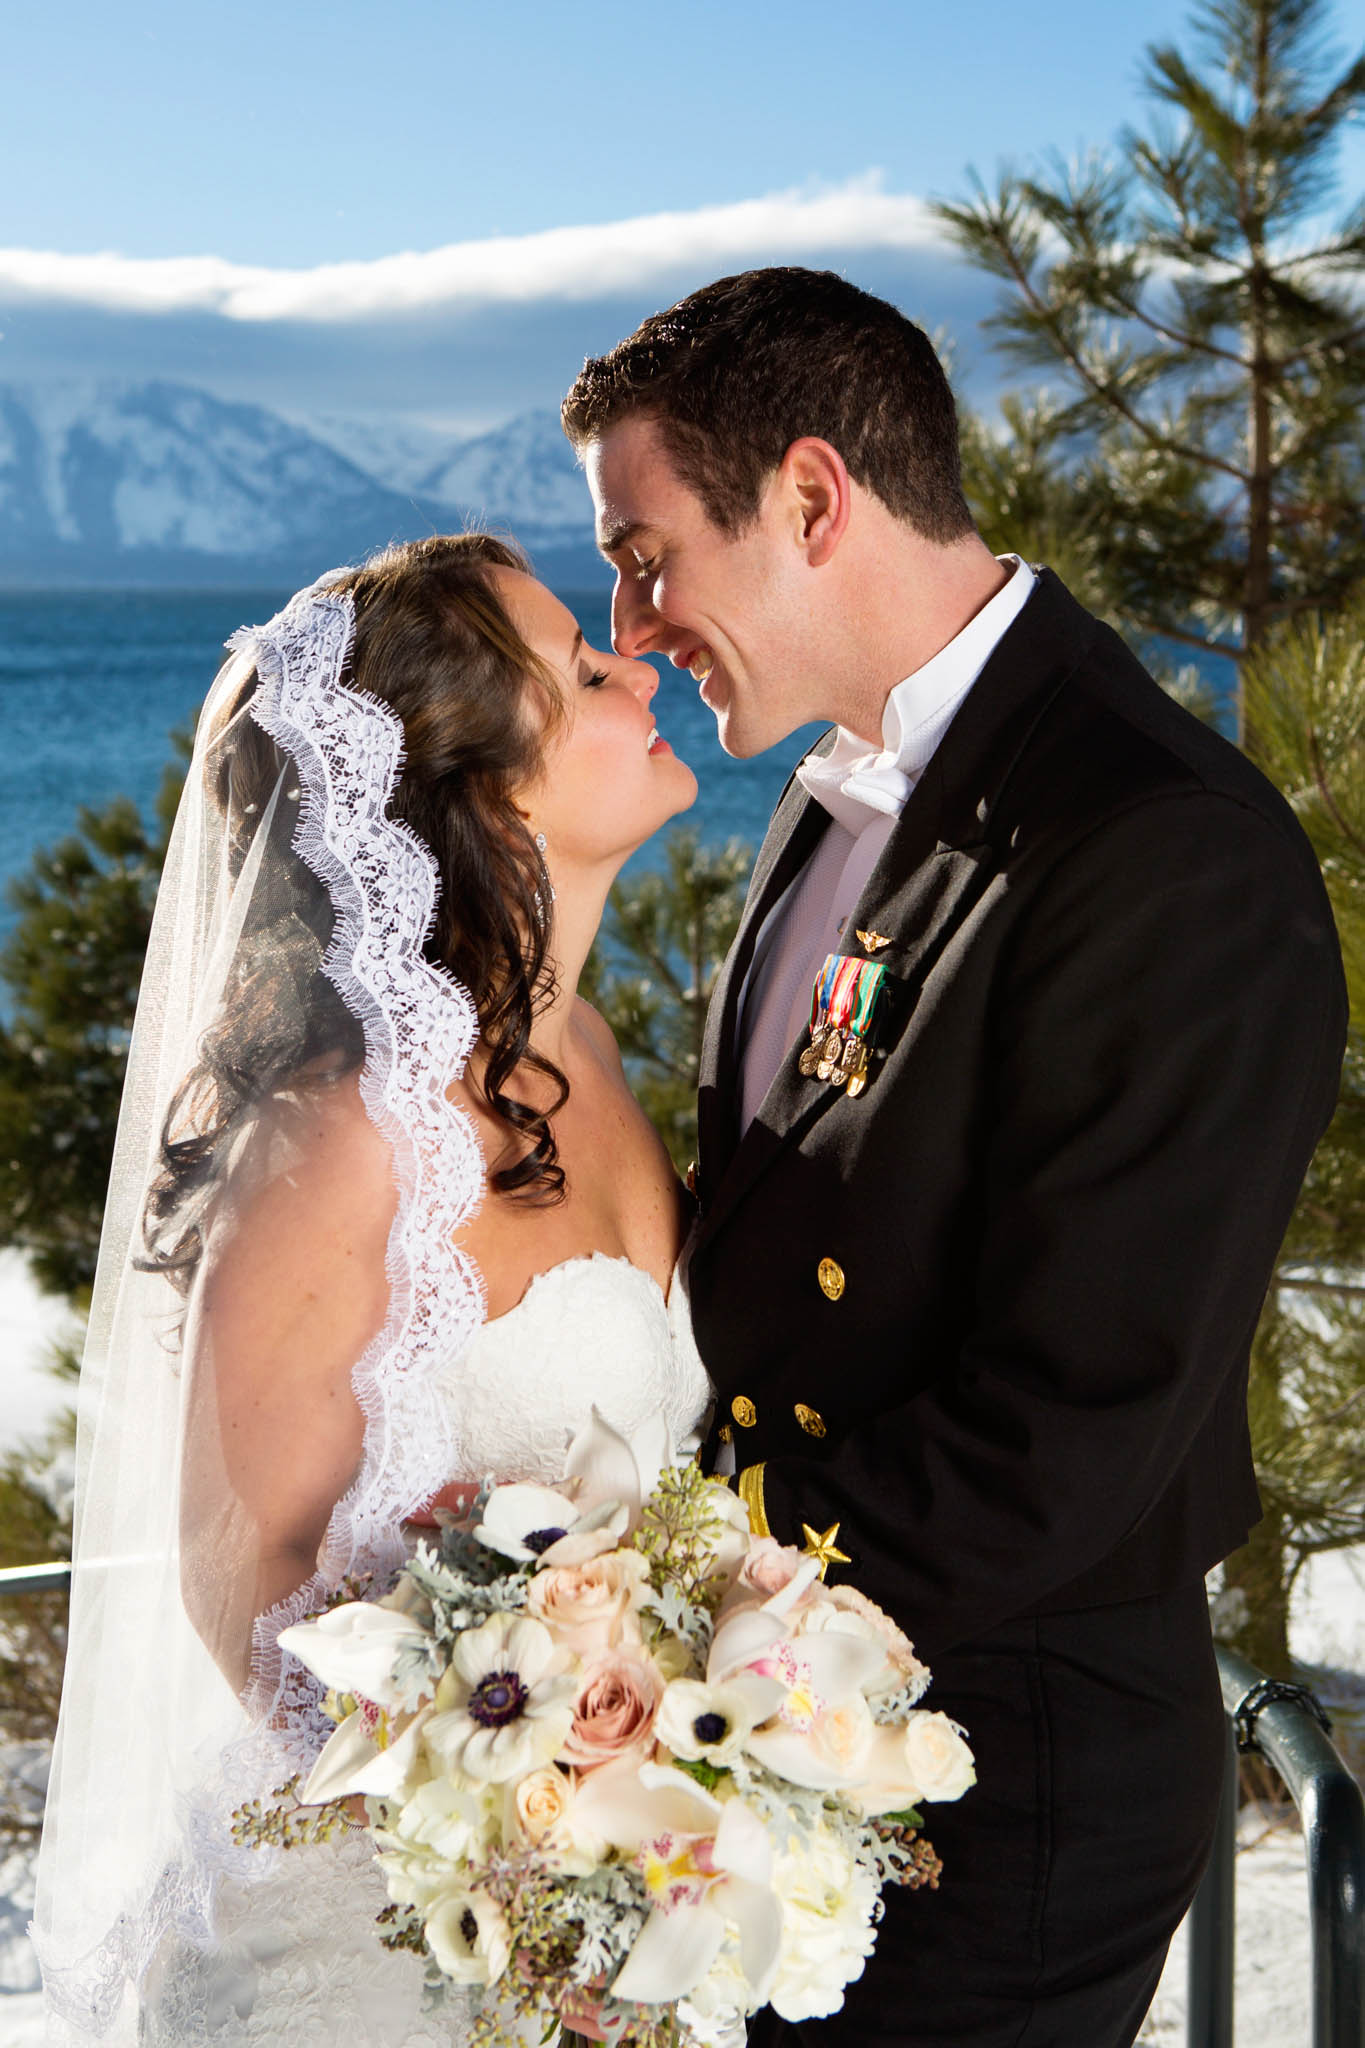 bride and groom kissing, smiling, lake view, snow, white bouquet, uniform